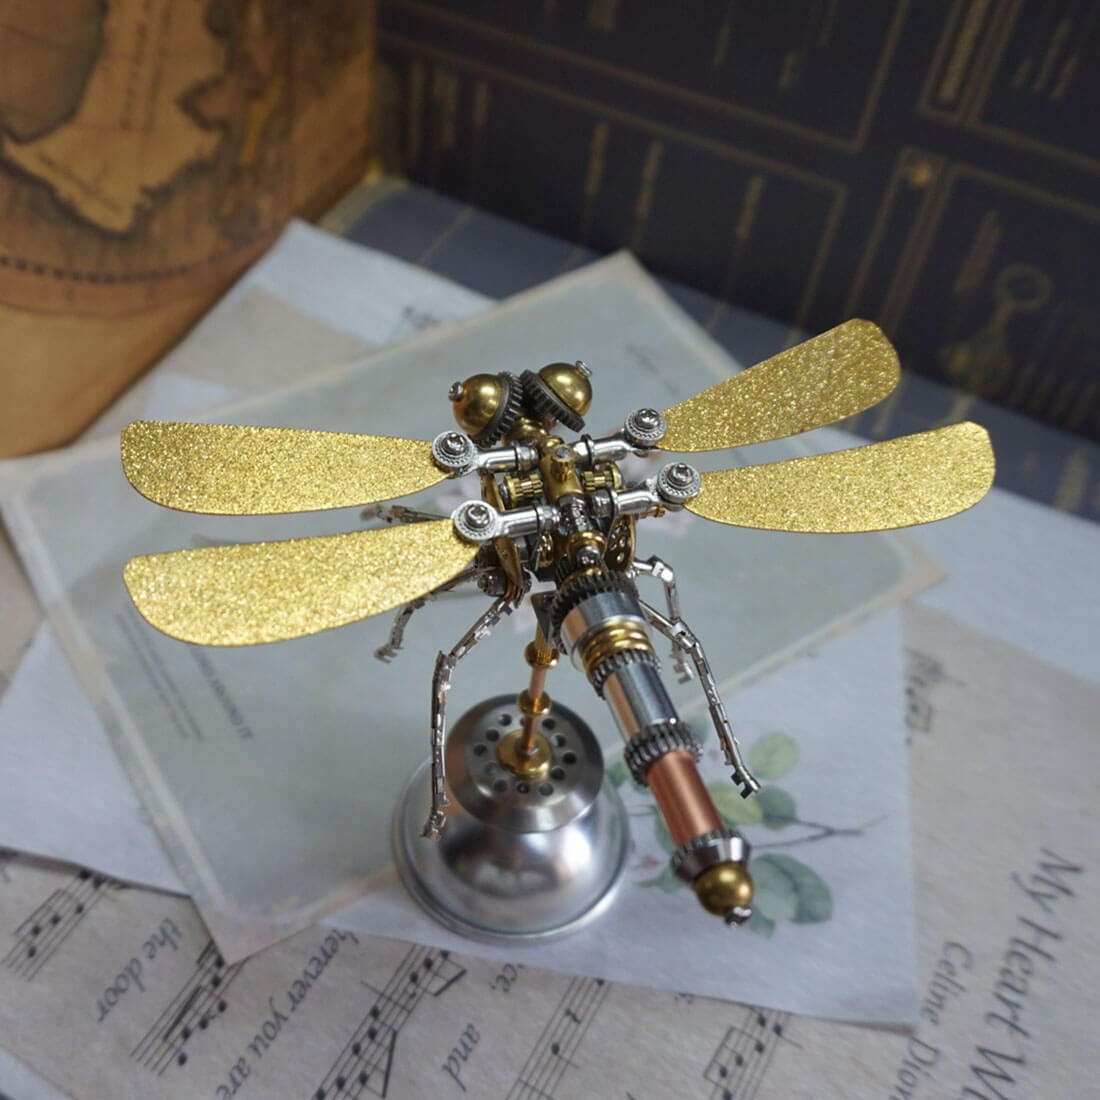 3d-diy-dragonfly-steampunk-mechanical-insect-metal-assembly-model-kit-kit-version-208pcs